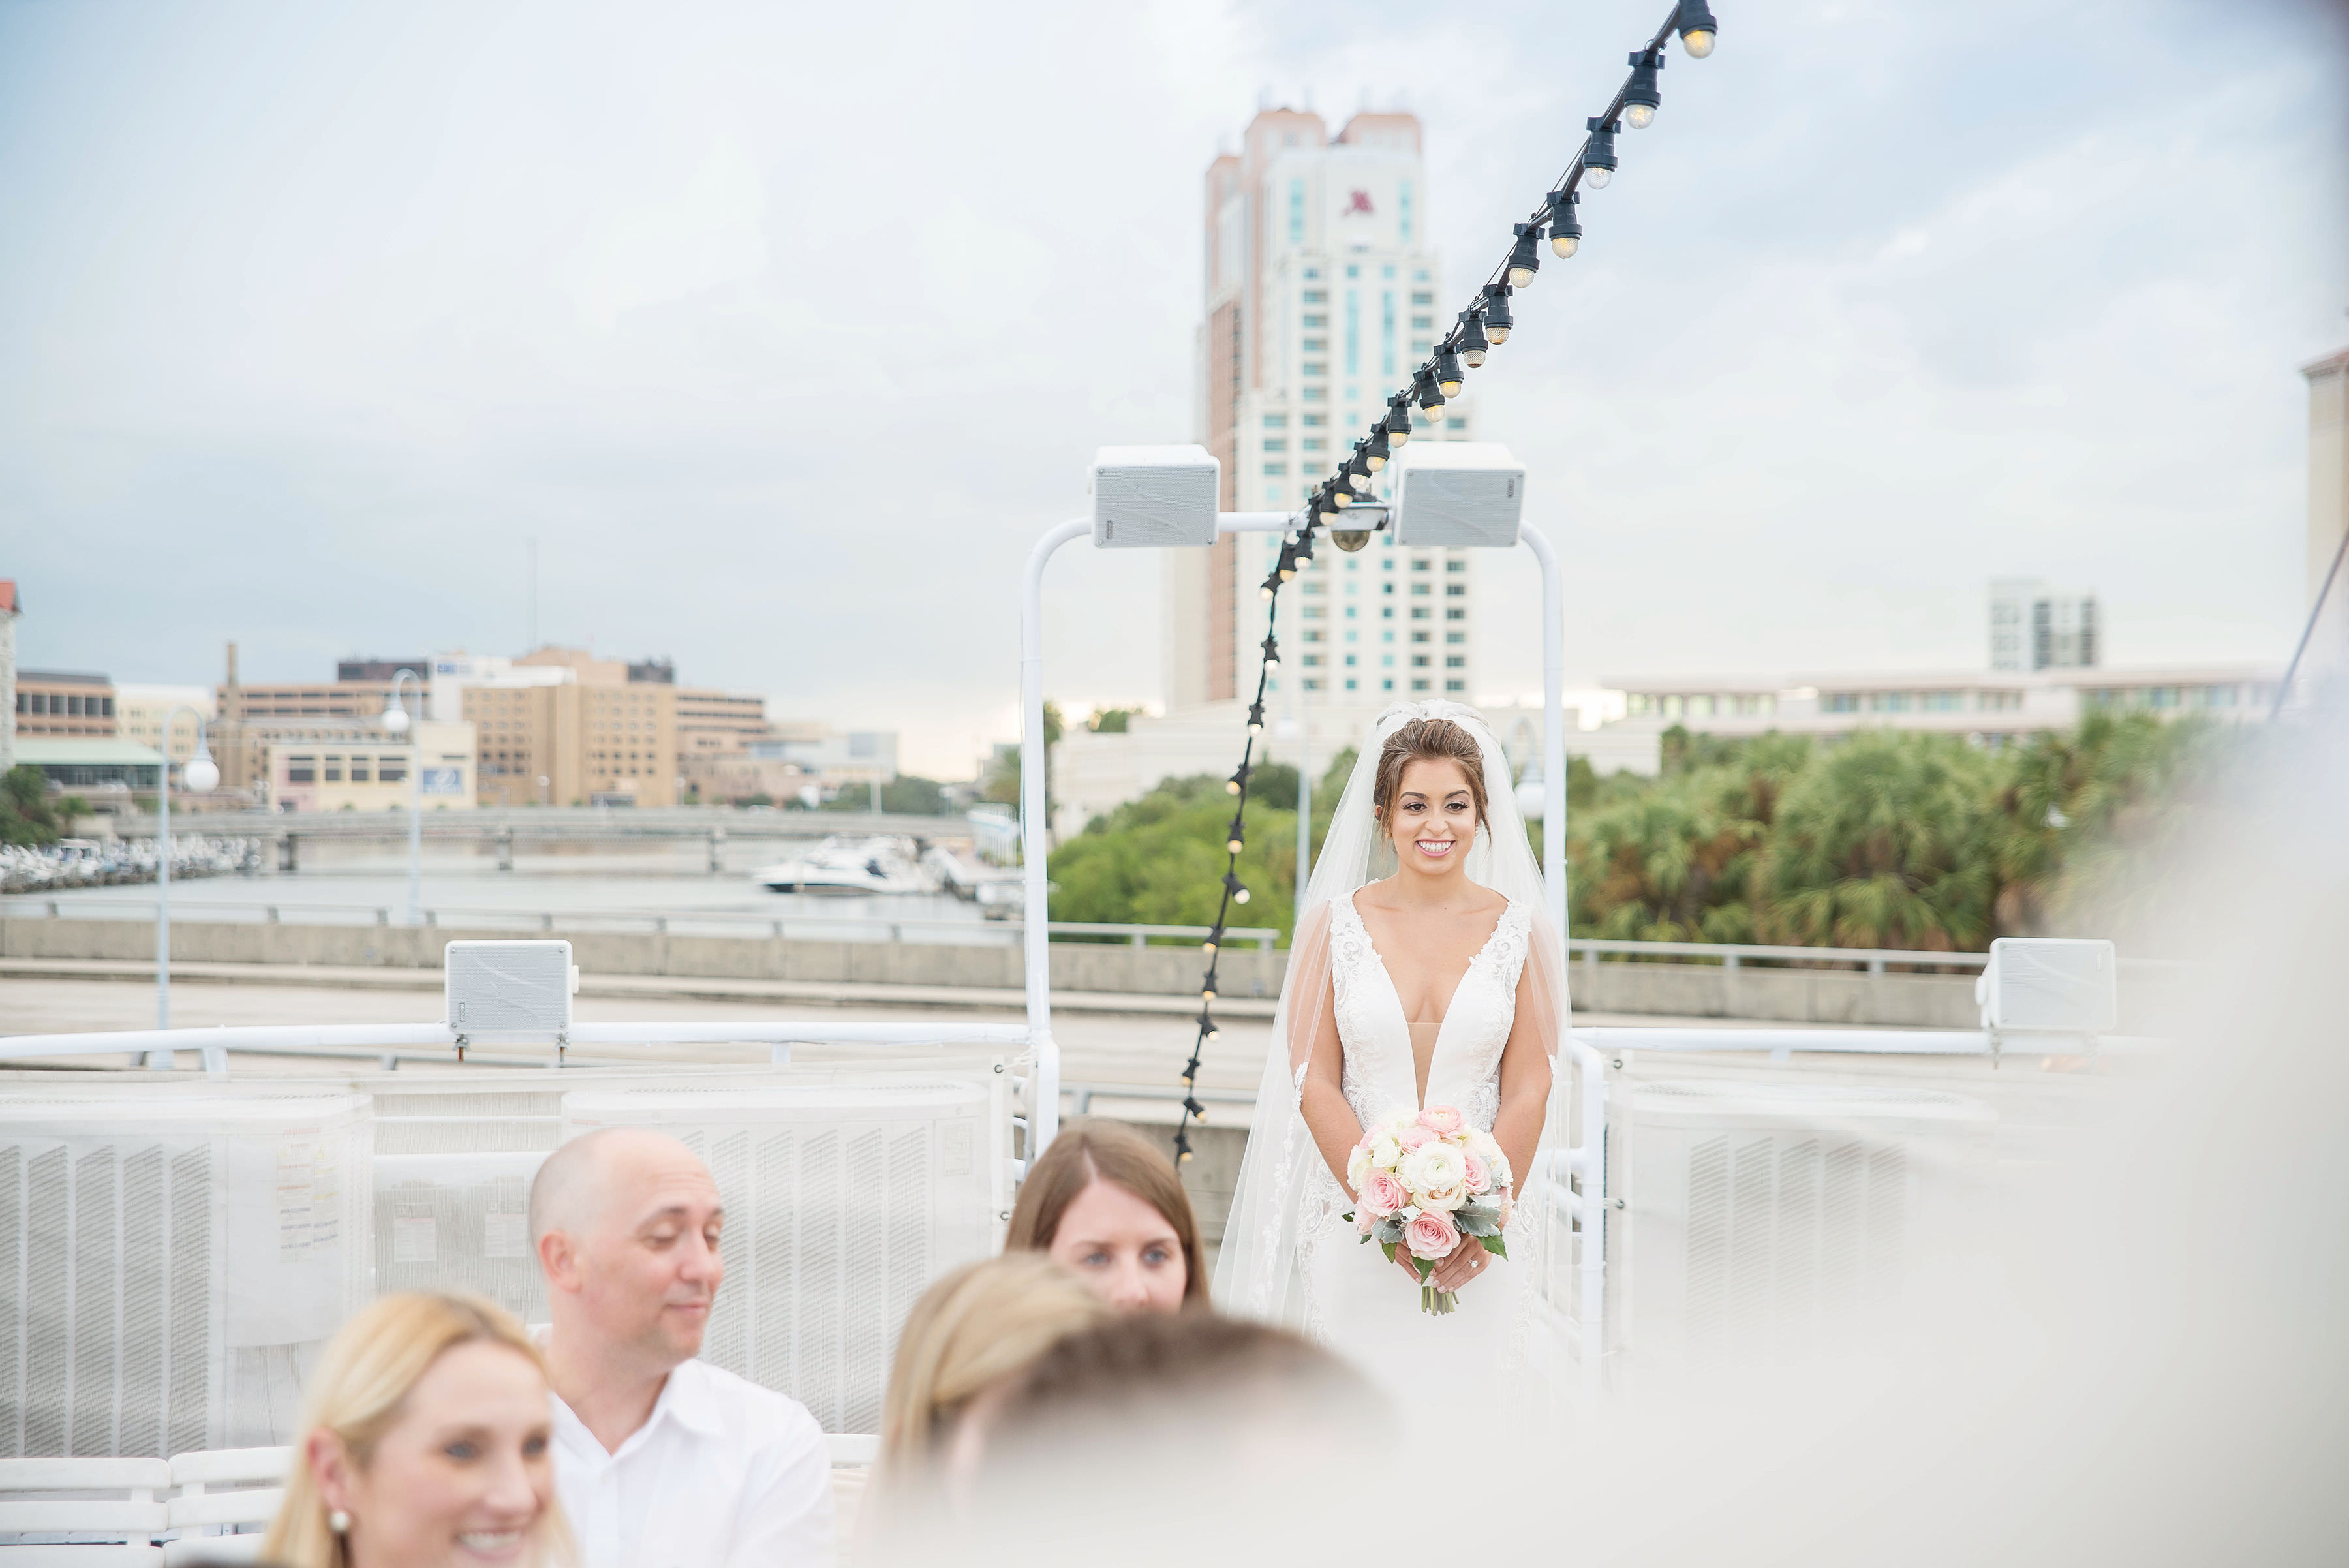 Florida Bride Wedding Ceremony Walking Down the Aisle Portrait in Deep V Neck Illusion Fitted Lace Tank Top Strap Wedding Dress with Blush Pink, Ivory and Dusty Miller Leaves Floral Bouquet | Tampa Bay Wedding Photographer Kristen Marie Photography | Wedding Dress Nikki's Glitz and Glam Boutique | Tampa Waterfront Venue Yacht Starship II | Hair and Makeup Destiny & Light Hair and Makeup Group